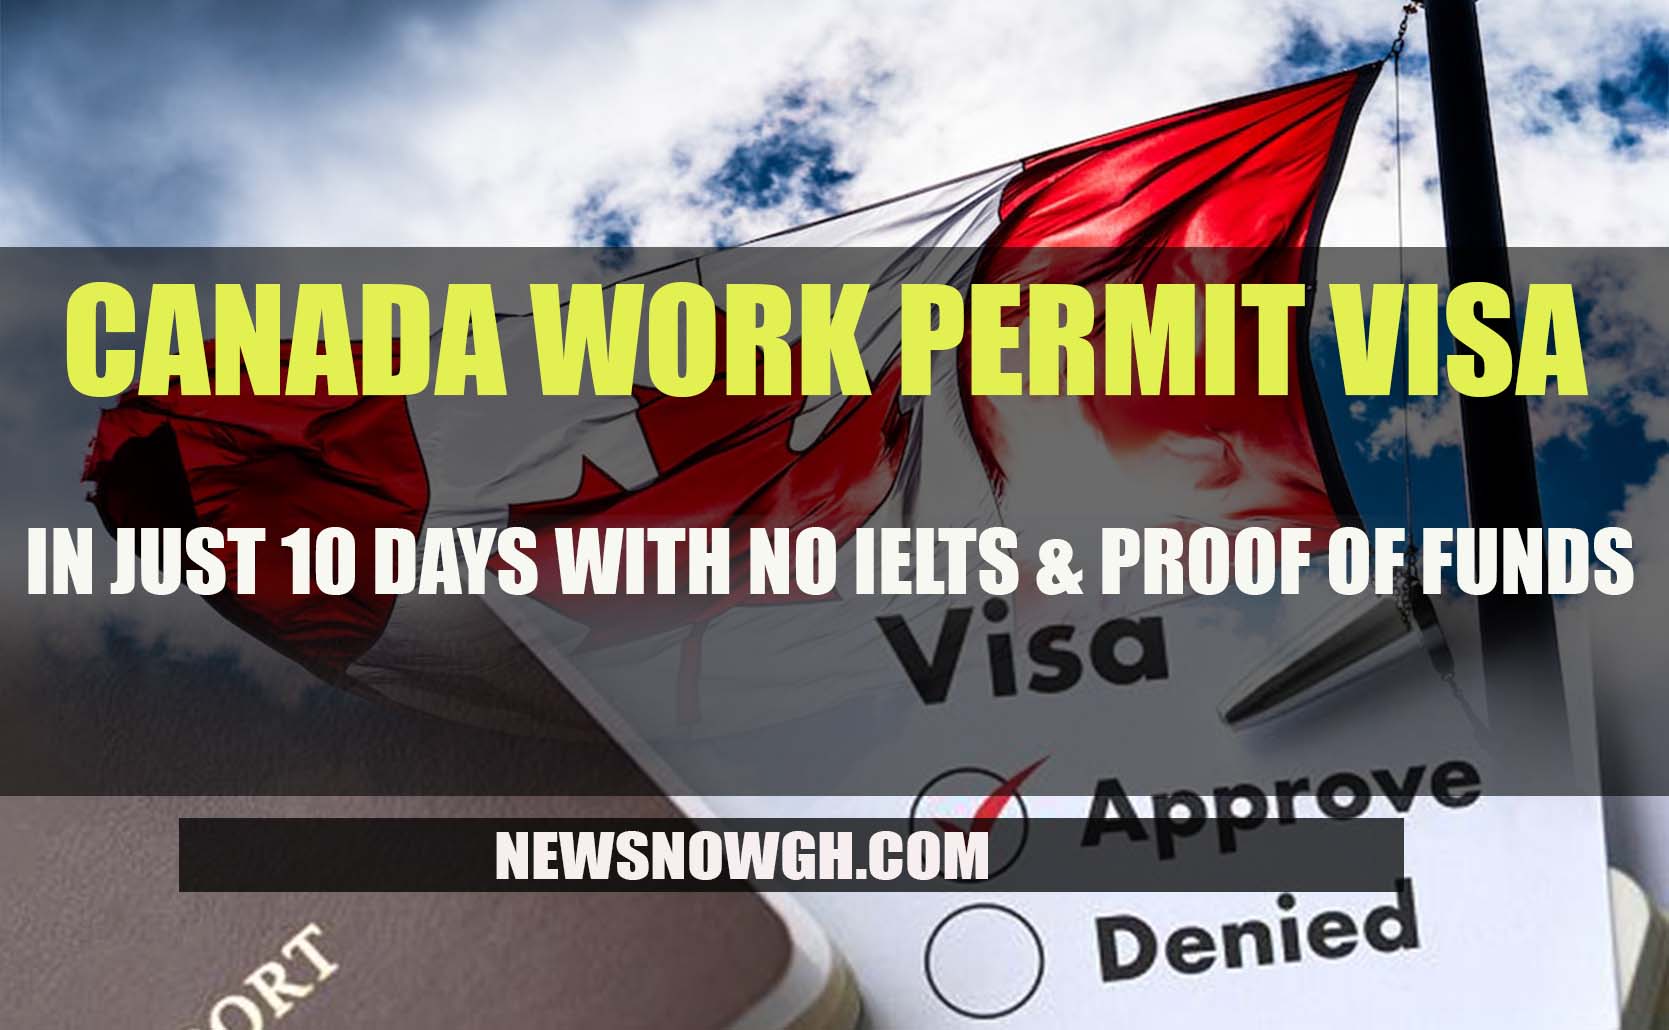 Canada Work Permit Visa With No Ielts And Proof Of Funds 6146